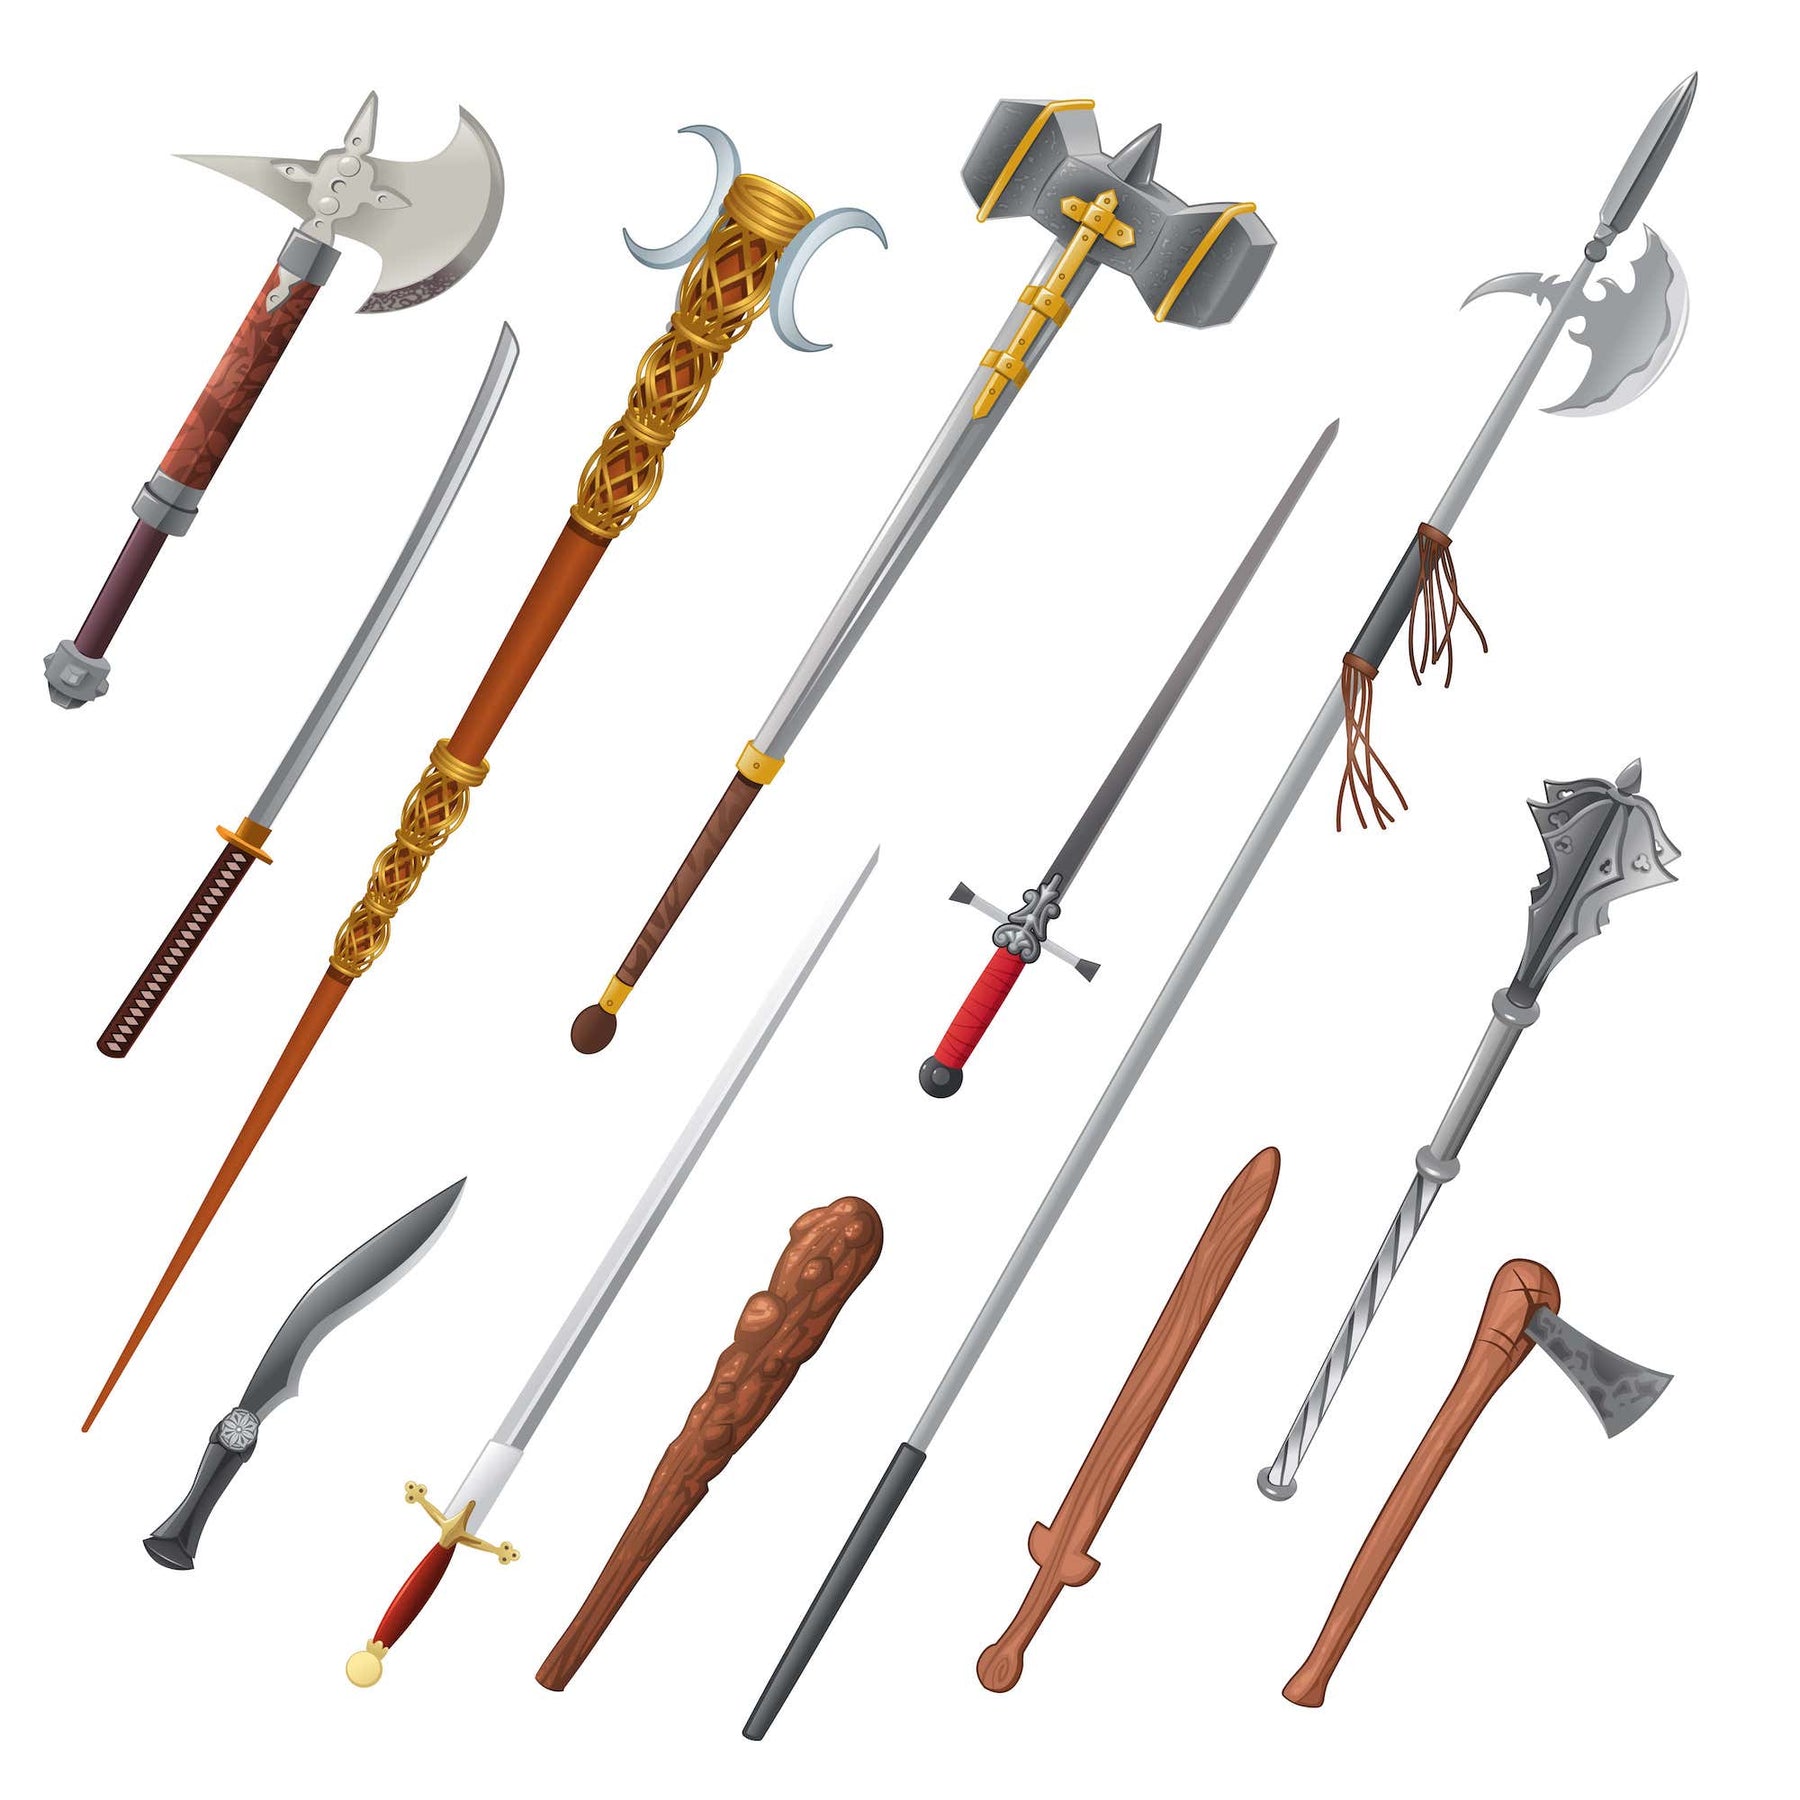 DND 5e Weapons